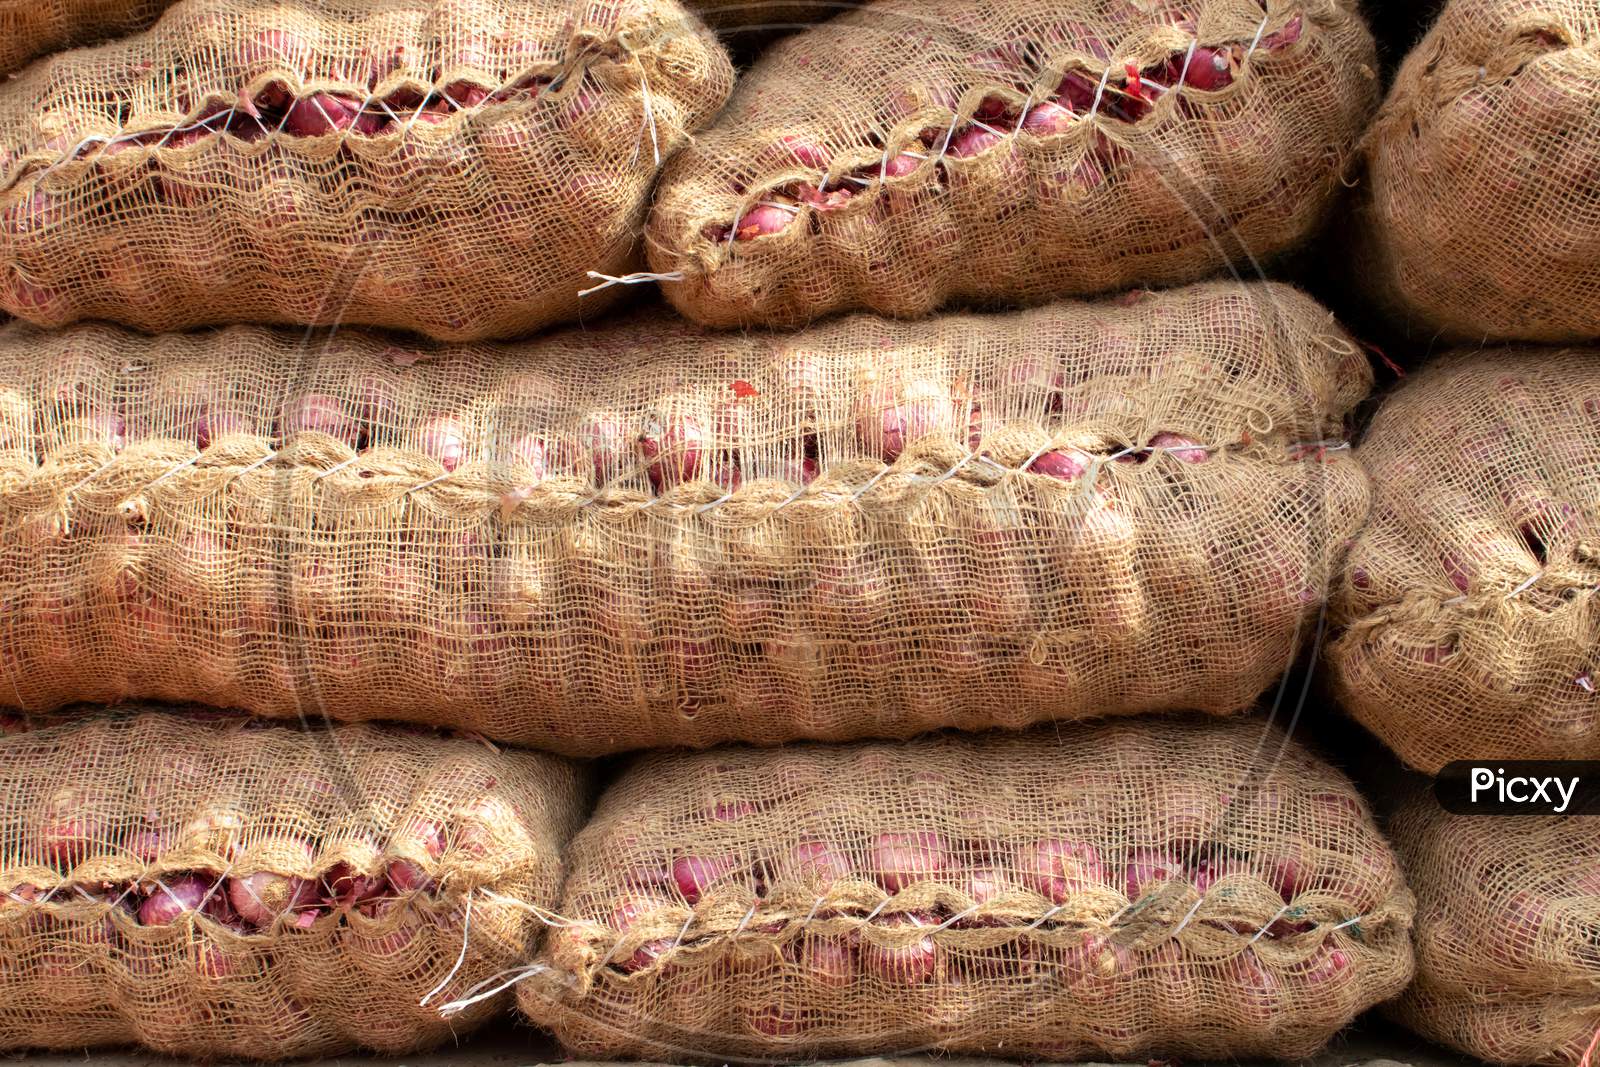 Onion Sacks In An Indian Vegetable Market For Selling And Exporting